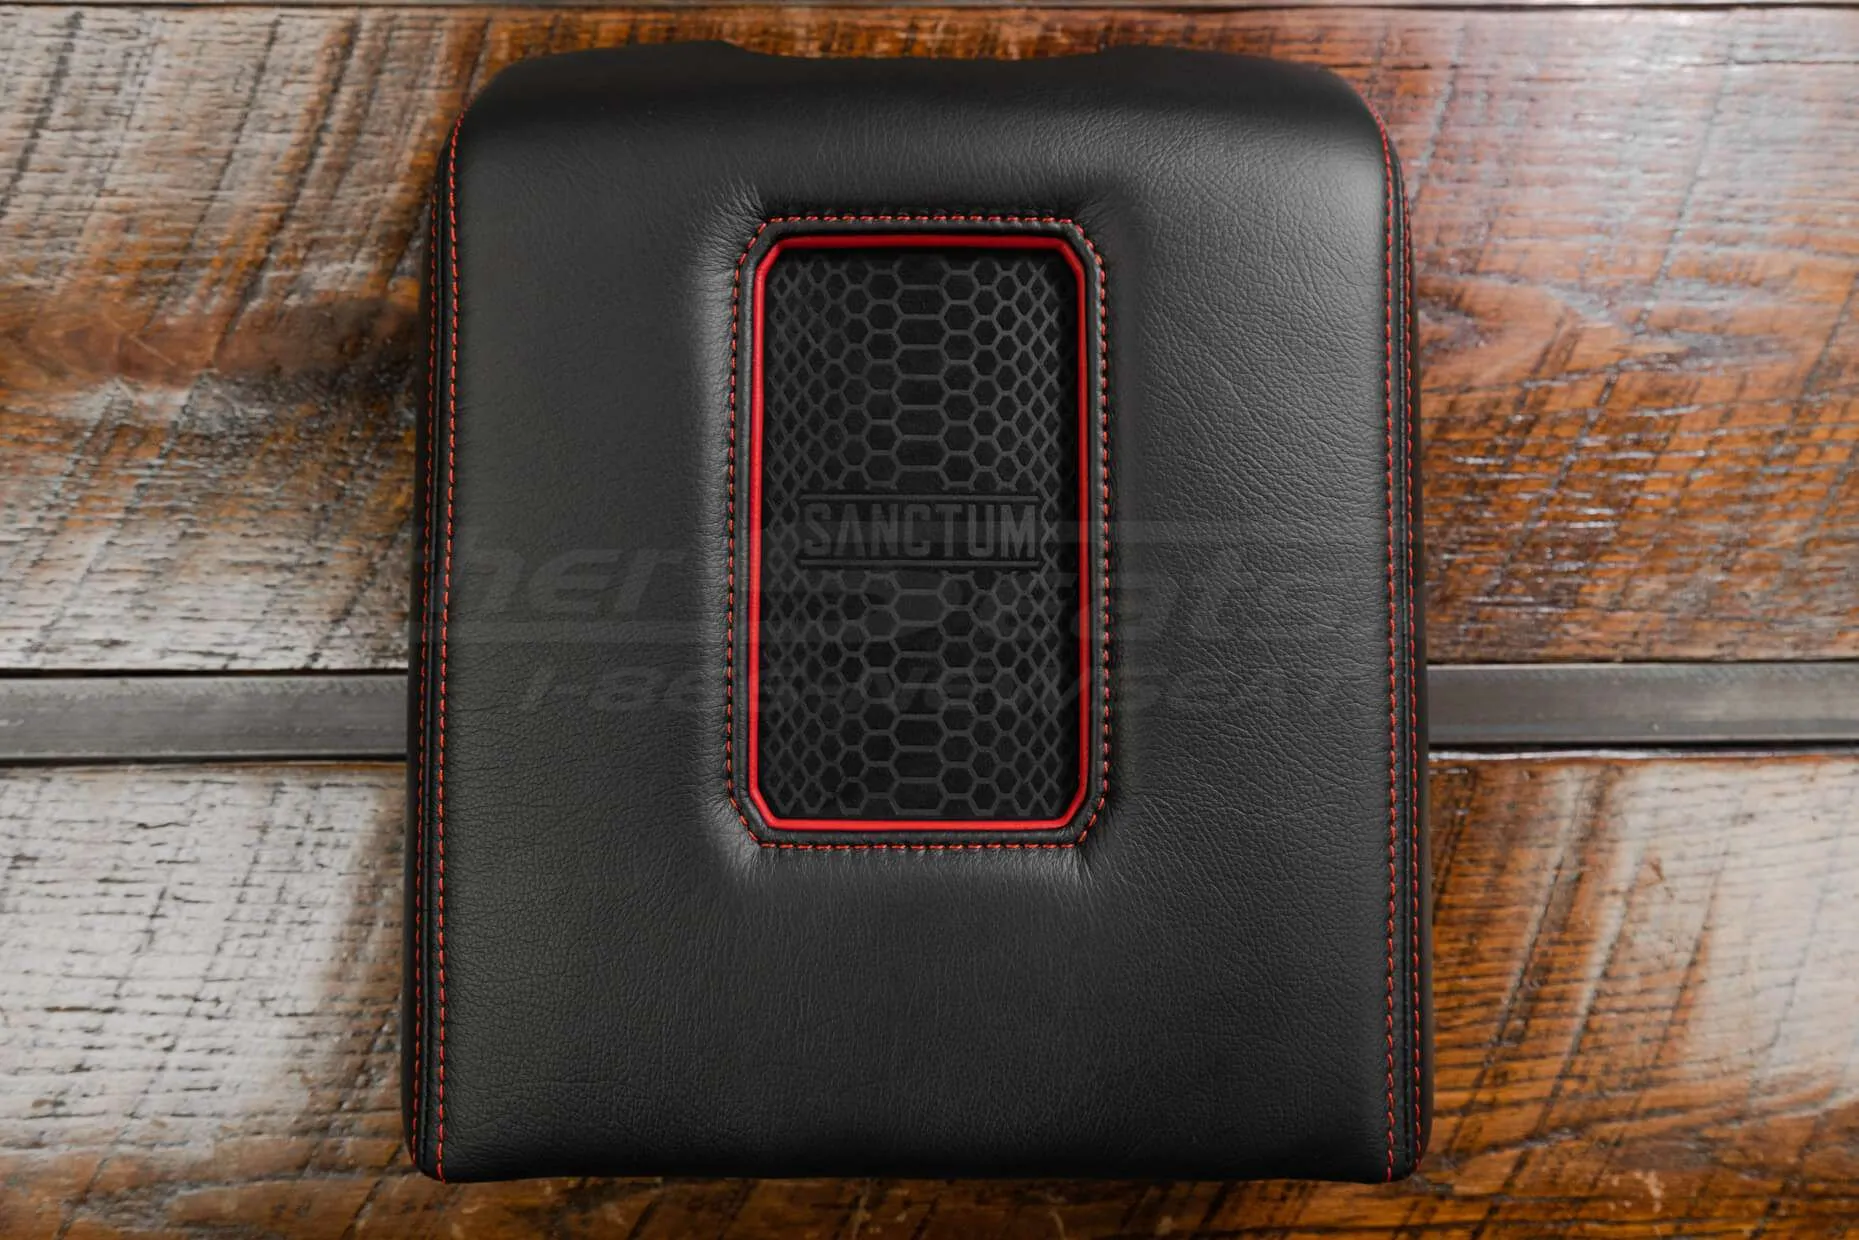 Top down view of Sanctum Wireless Phone Charging Console